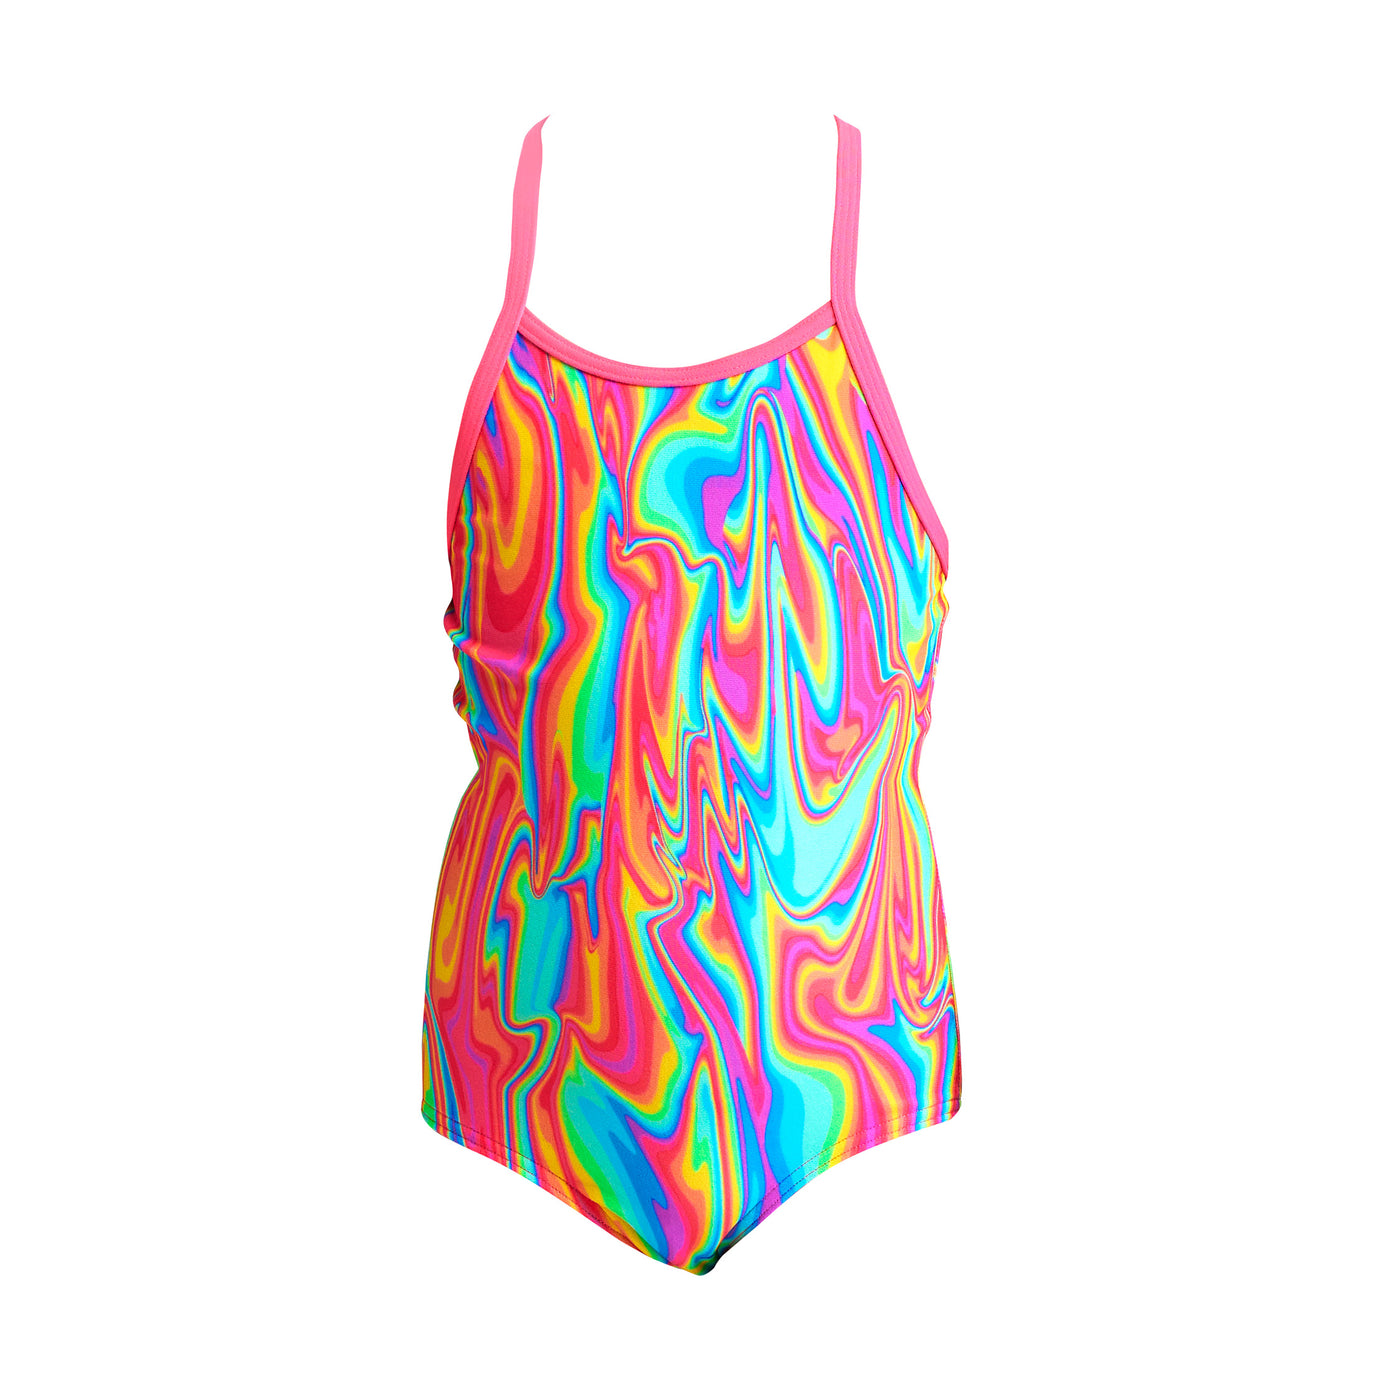 Moon Shine Print One Piece Swimsuit FG01T - Toddler 1-7yrs